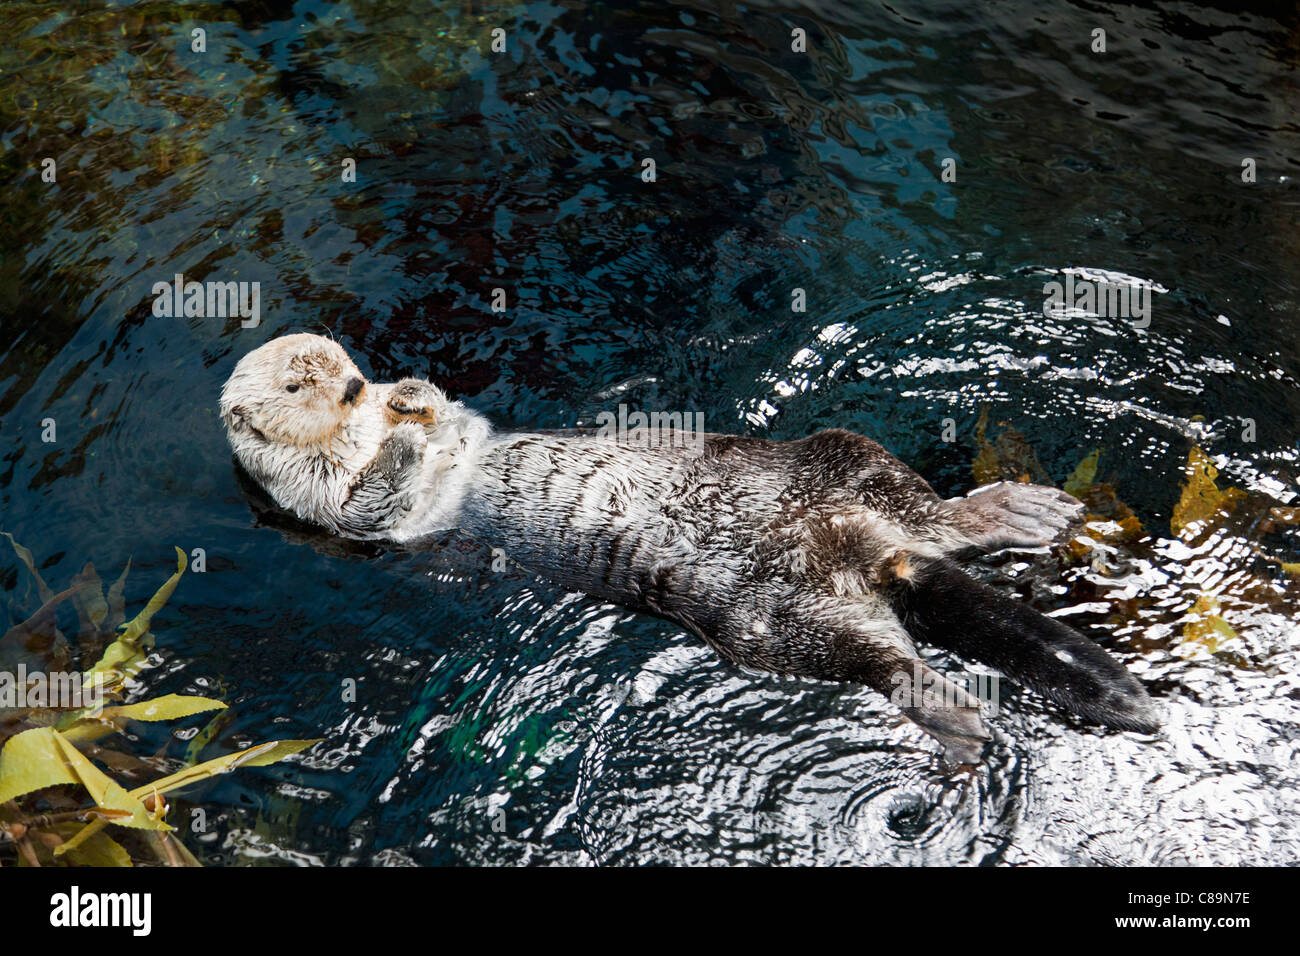 Europe, View of Sea Otter in water Stock Photo